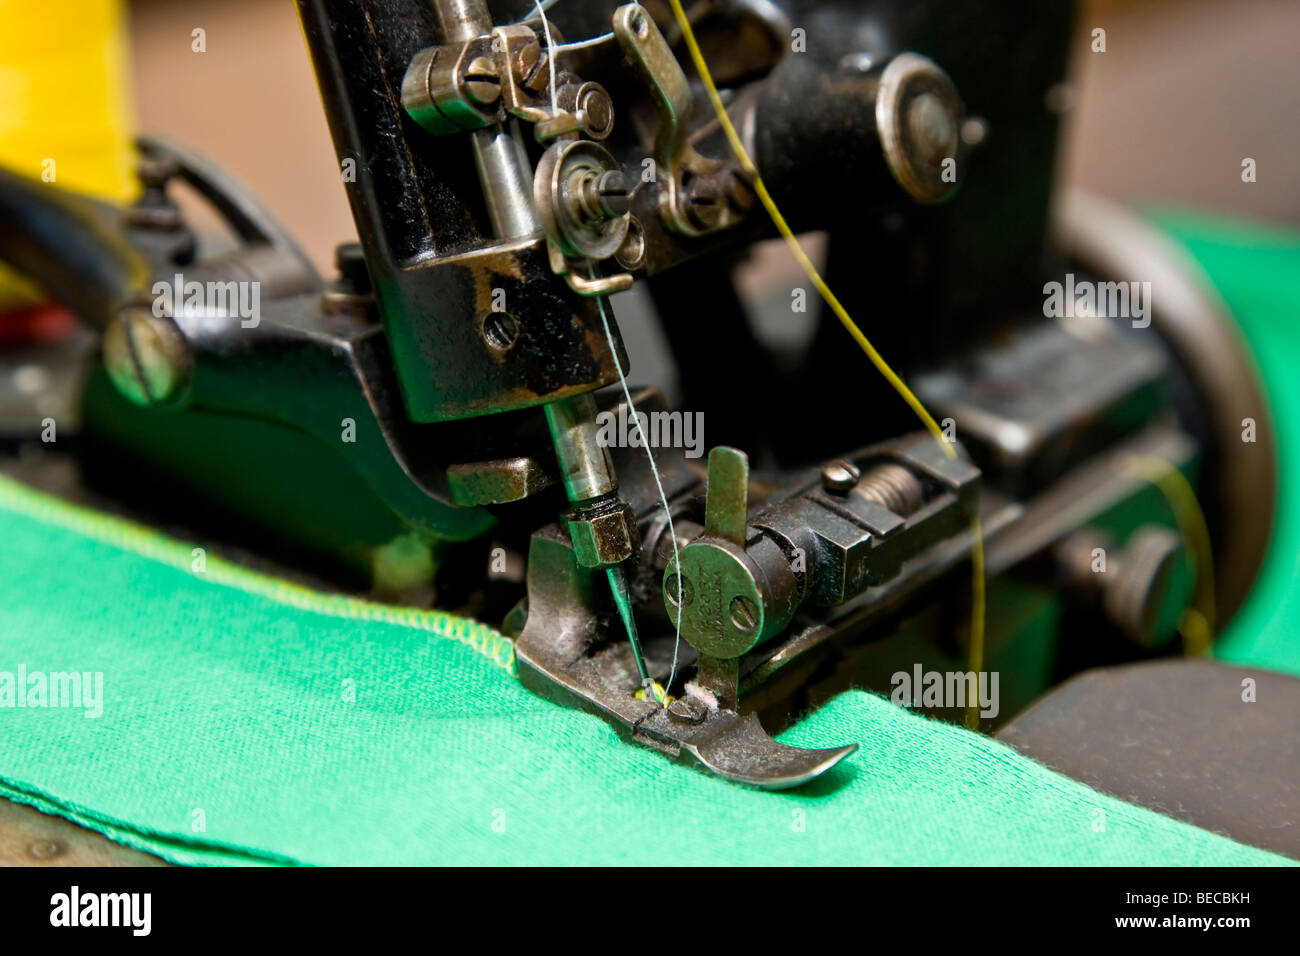 Detail of old industrial sewing machine Stock Photo